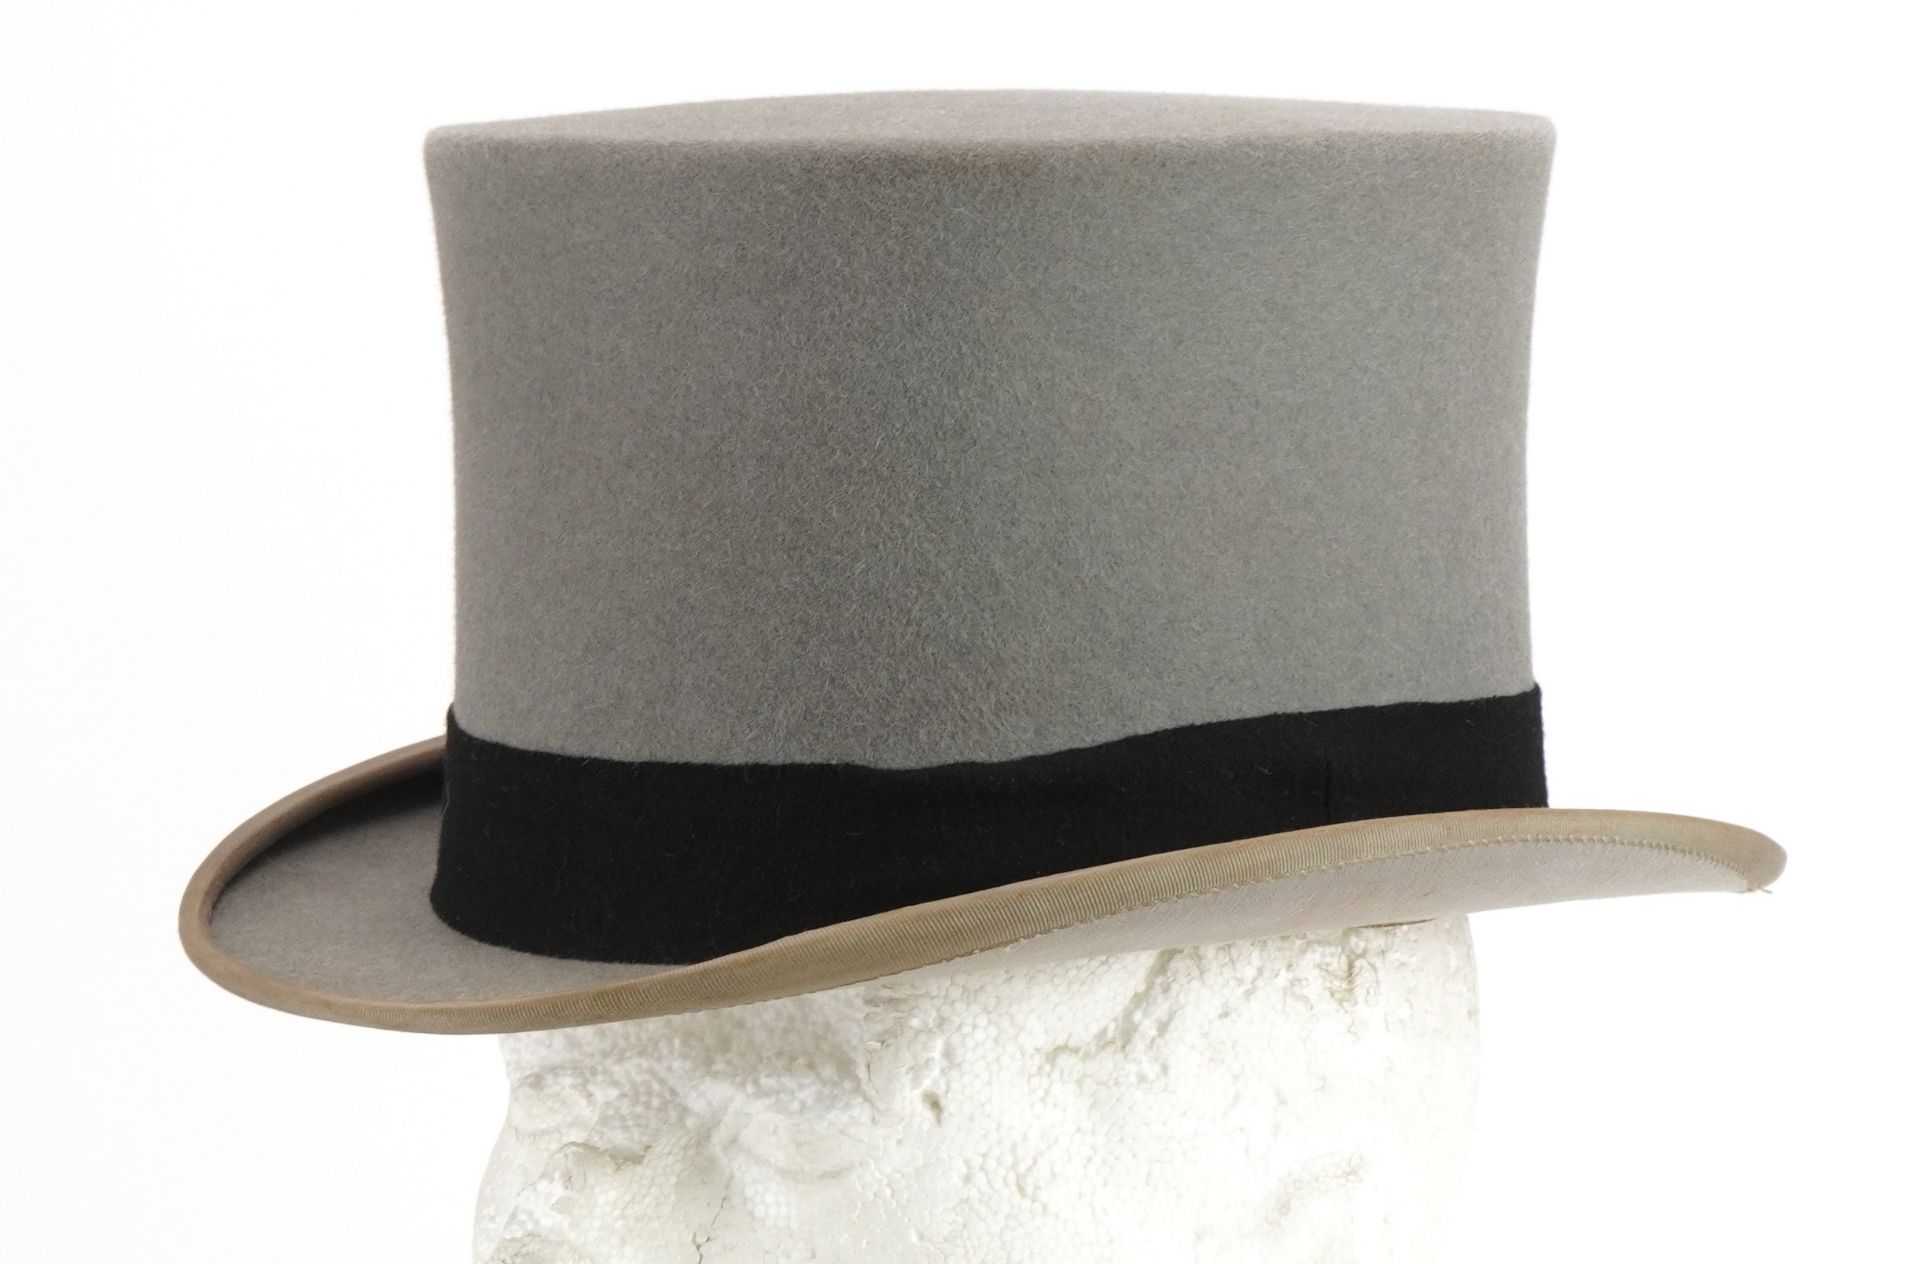 Scott & Co top hat housed in a brown leatherette travel box, the top hat interior size 21cm x 17cm : - Image 7 of 7